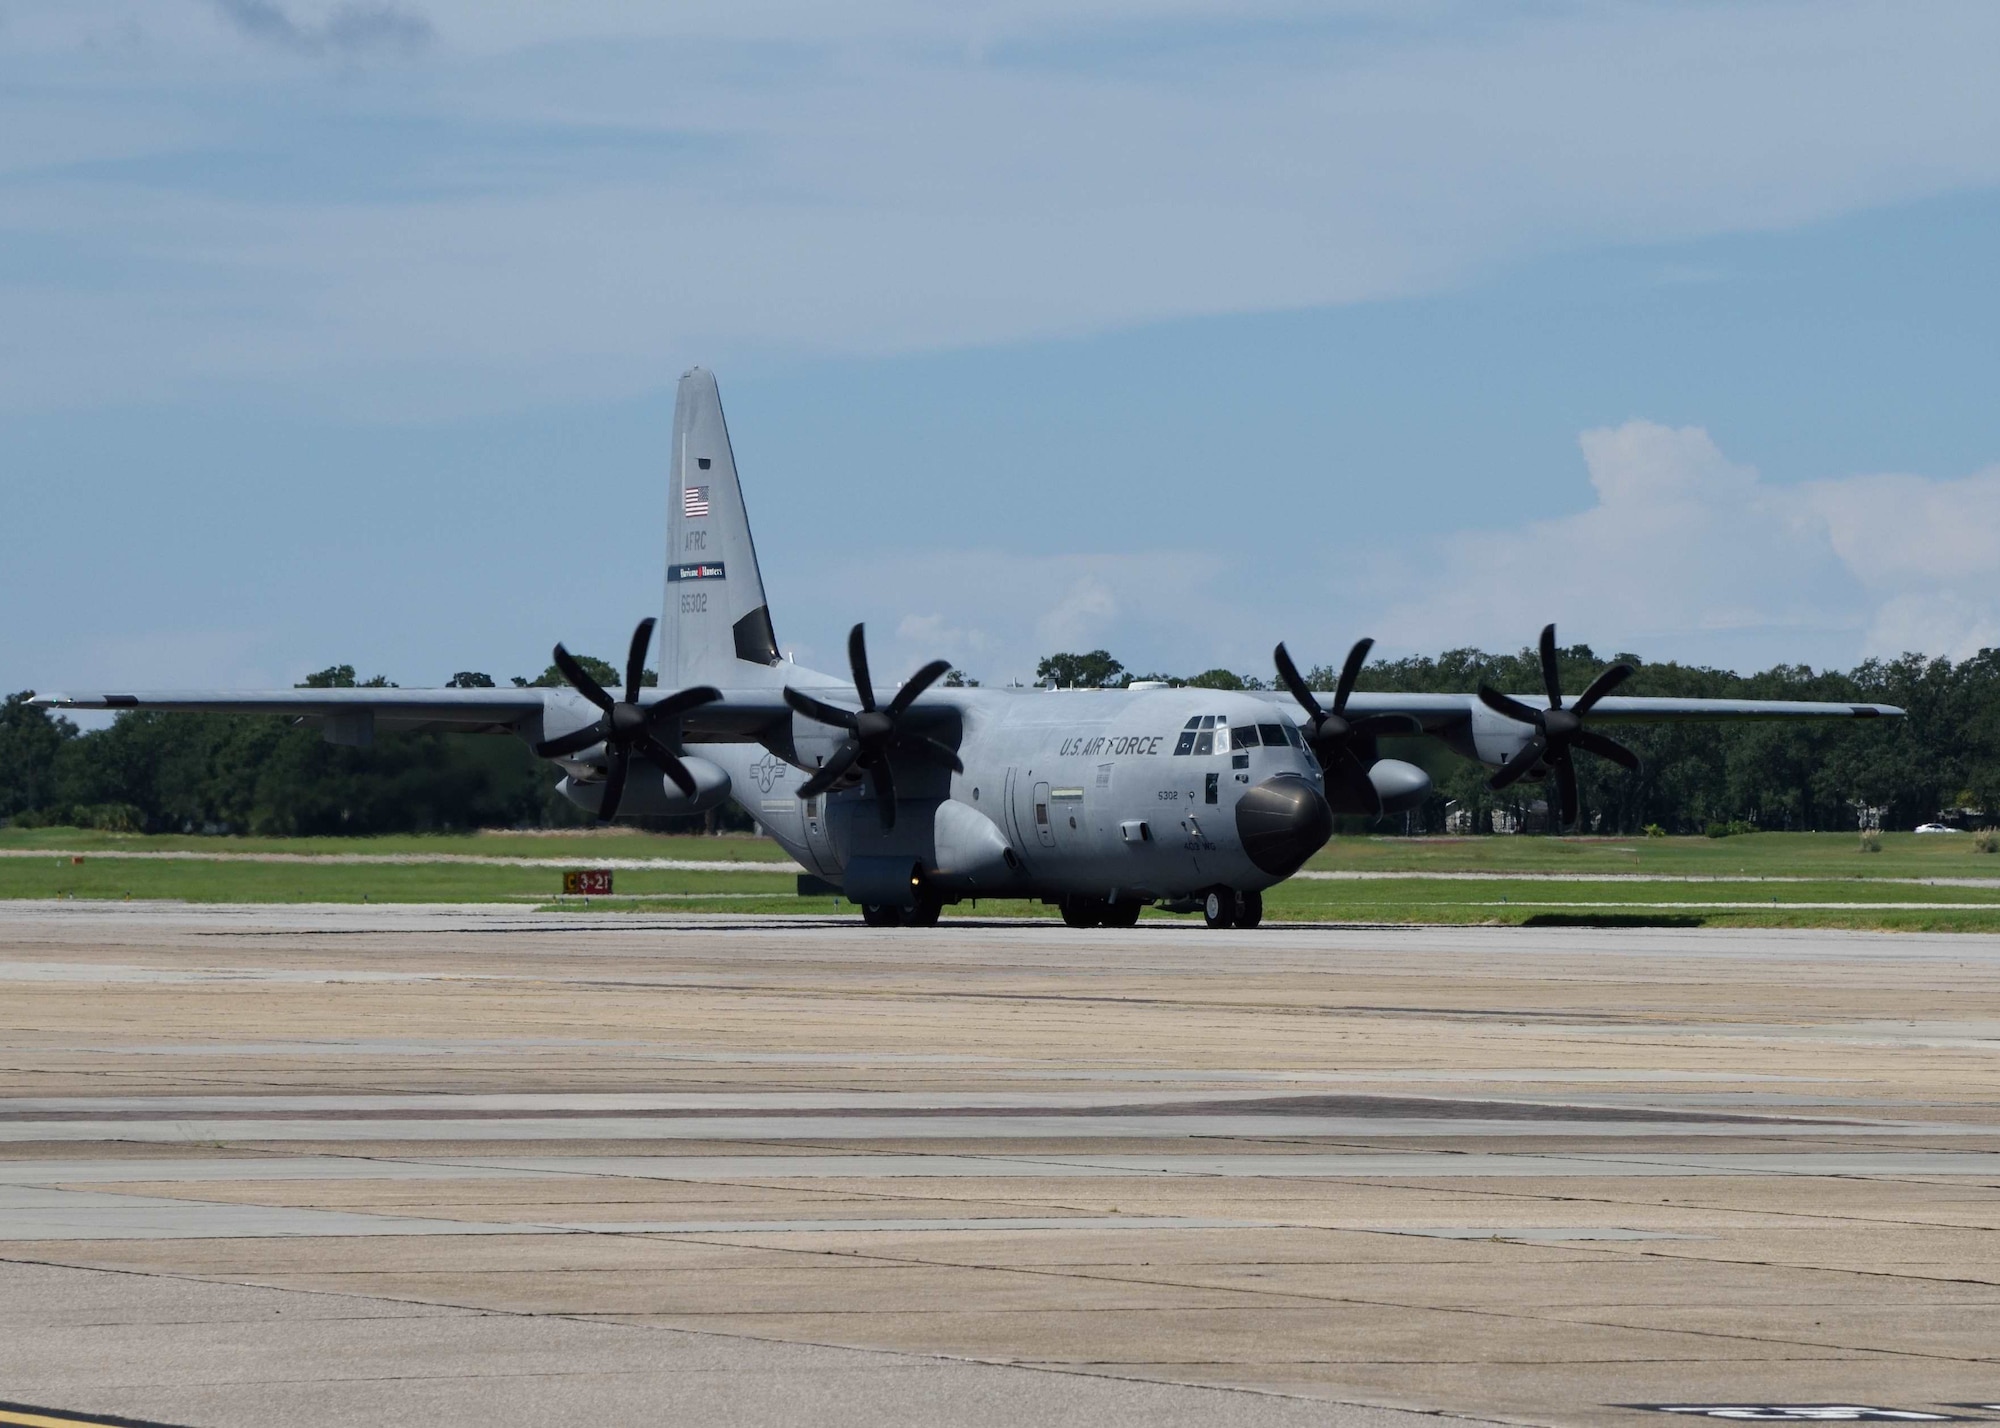 The Air Force Reserve’s 53rd Weather Reconnaissance Squadron departed Keesler Air Force Base, Mississippi, Sept. 9, 2018, to operate out of Savannah/Hilton Head International Airport, Savannah, Georgia. The Reserve Citizen Airmen will start flying reconnaissance missions into Hurricane Florence Sept. 10, 2018. The Hurricane Hunters also started flying missions into Hurricane Olivia out of the Kalaeloa Airport, Hawaii, Sept. 8, 2018. (U.S. Air Force photo/Lt. Col. Marnee A.C. Losurdo)